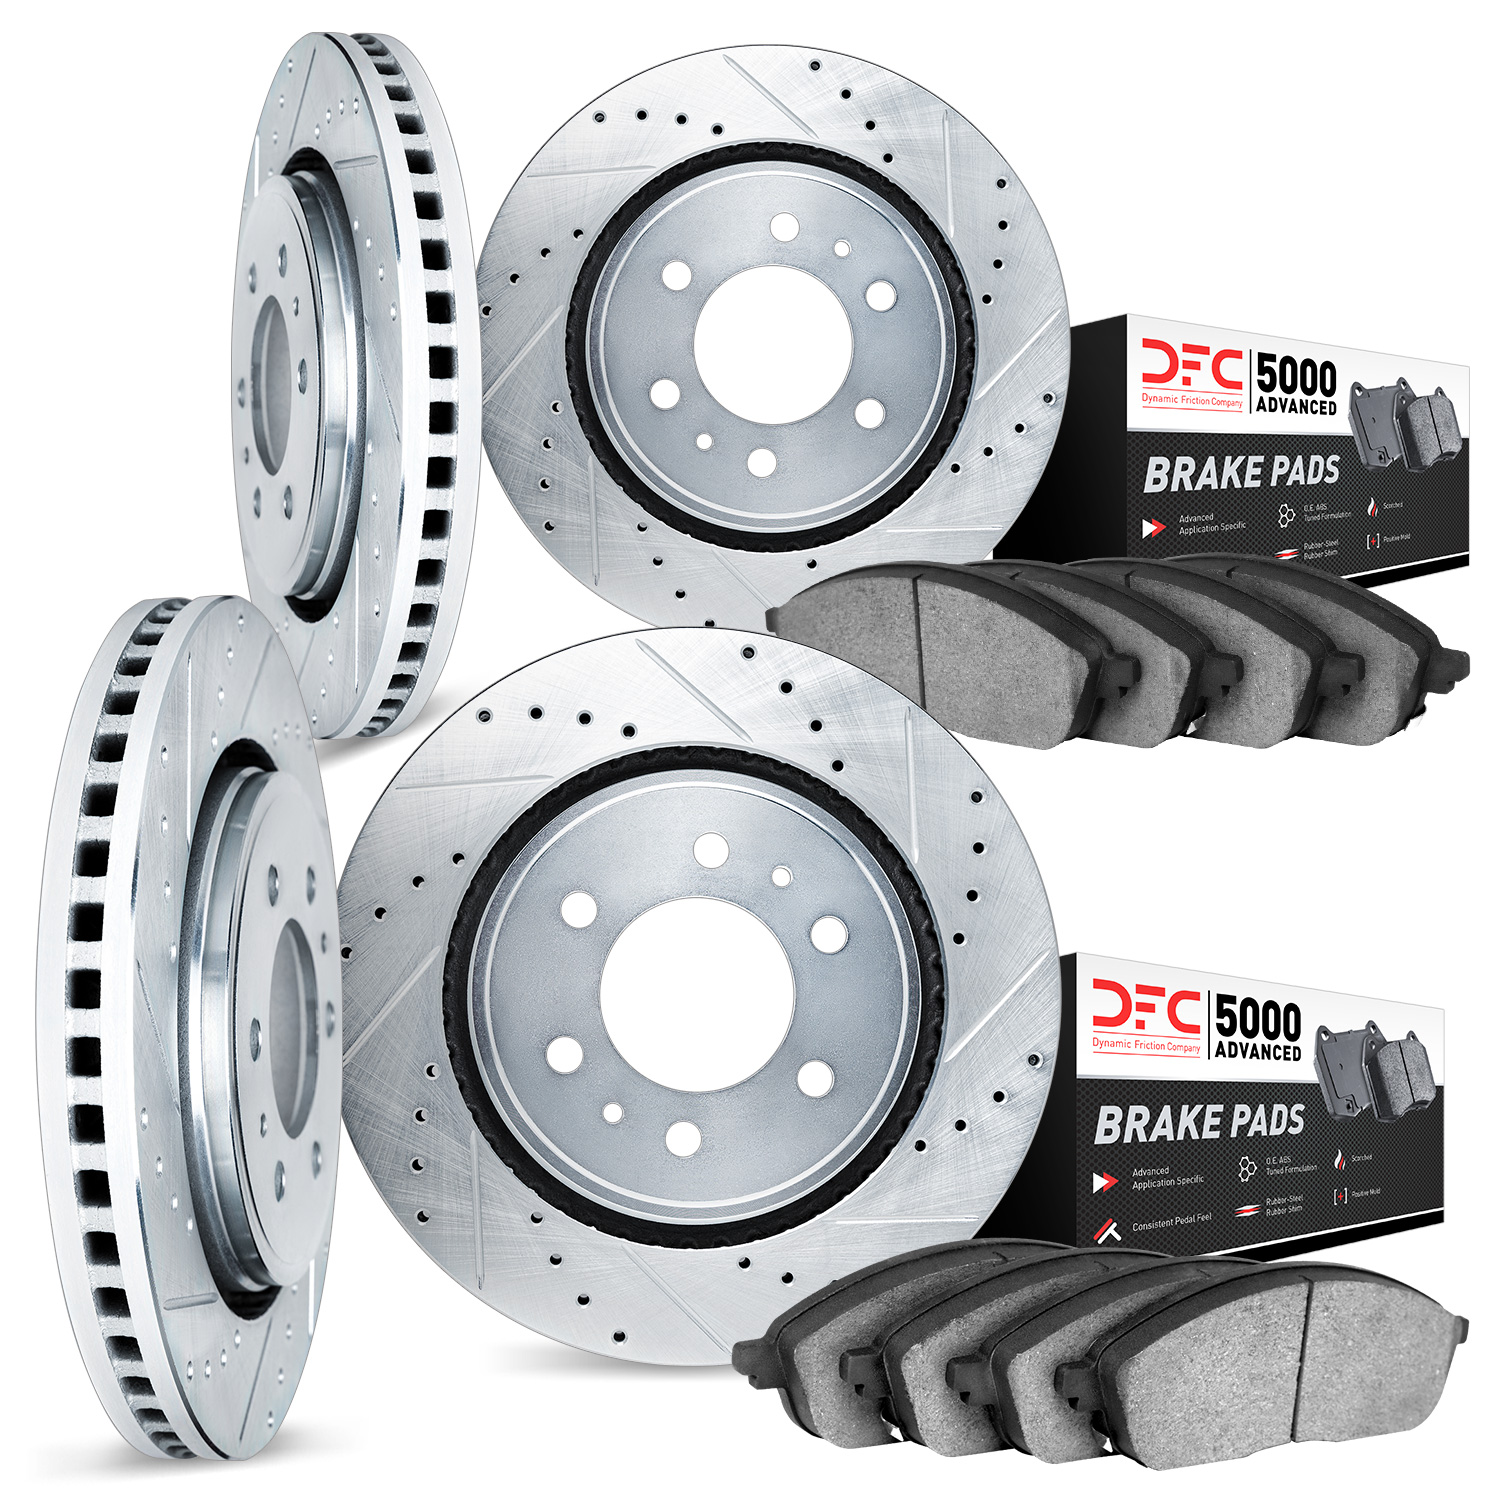 7504-54355 Drilled/Slotted Brake Rotors w/5000 Advanced Brake Pads Kit [Silver], 2009-2009 Ford/Lincoln/Mercury/Mazda, Position: